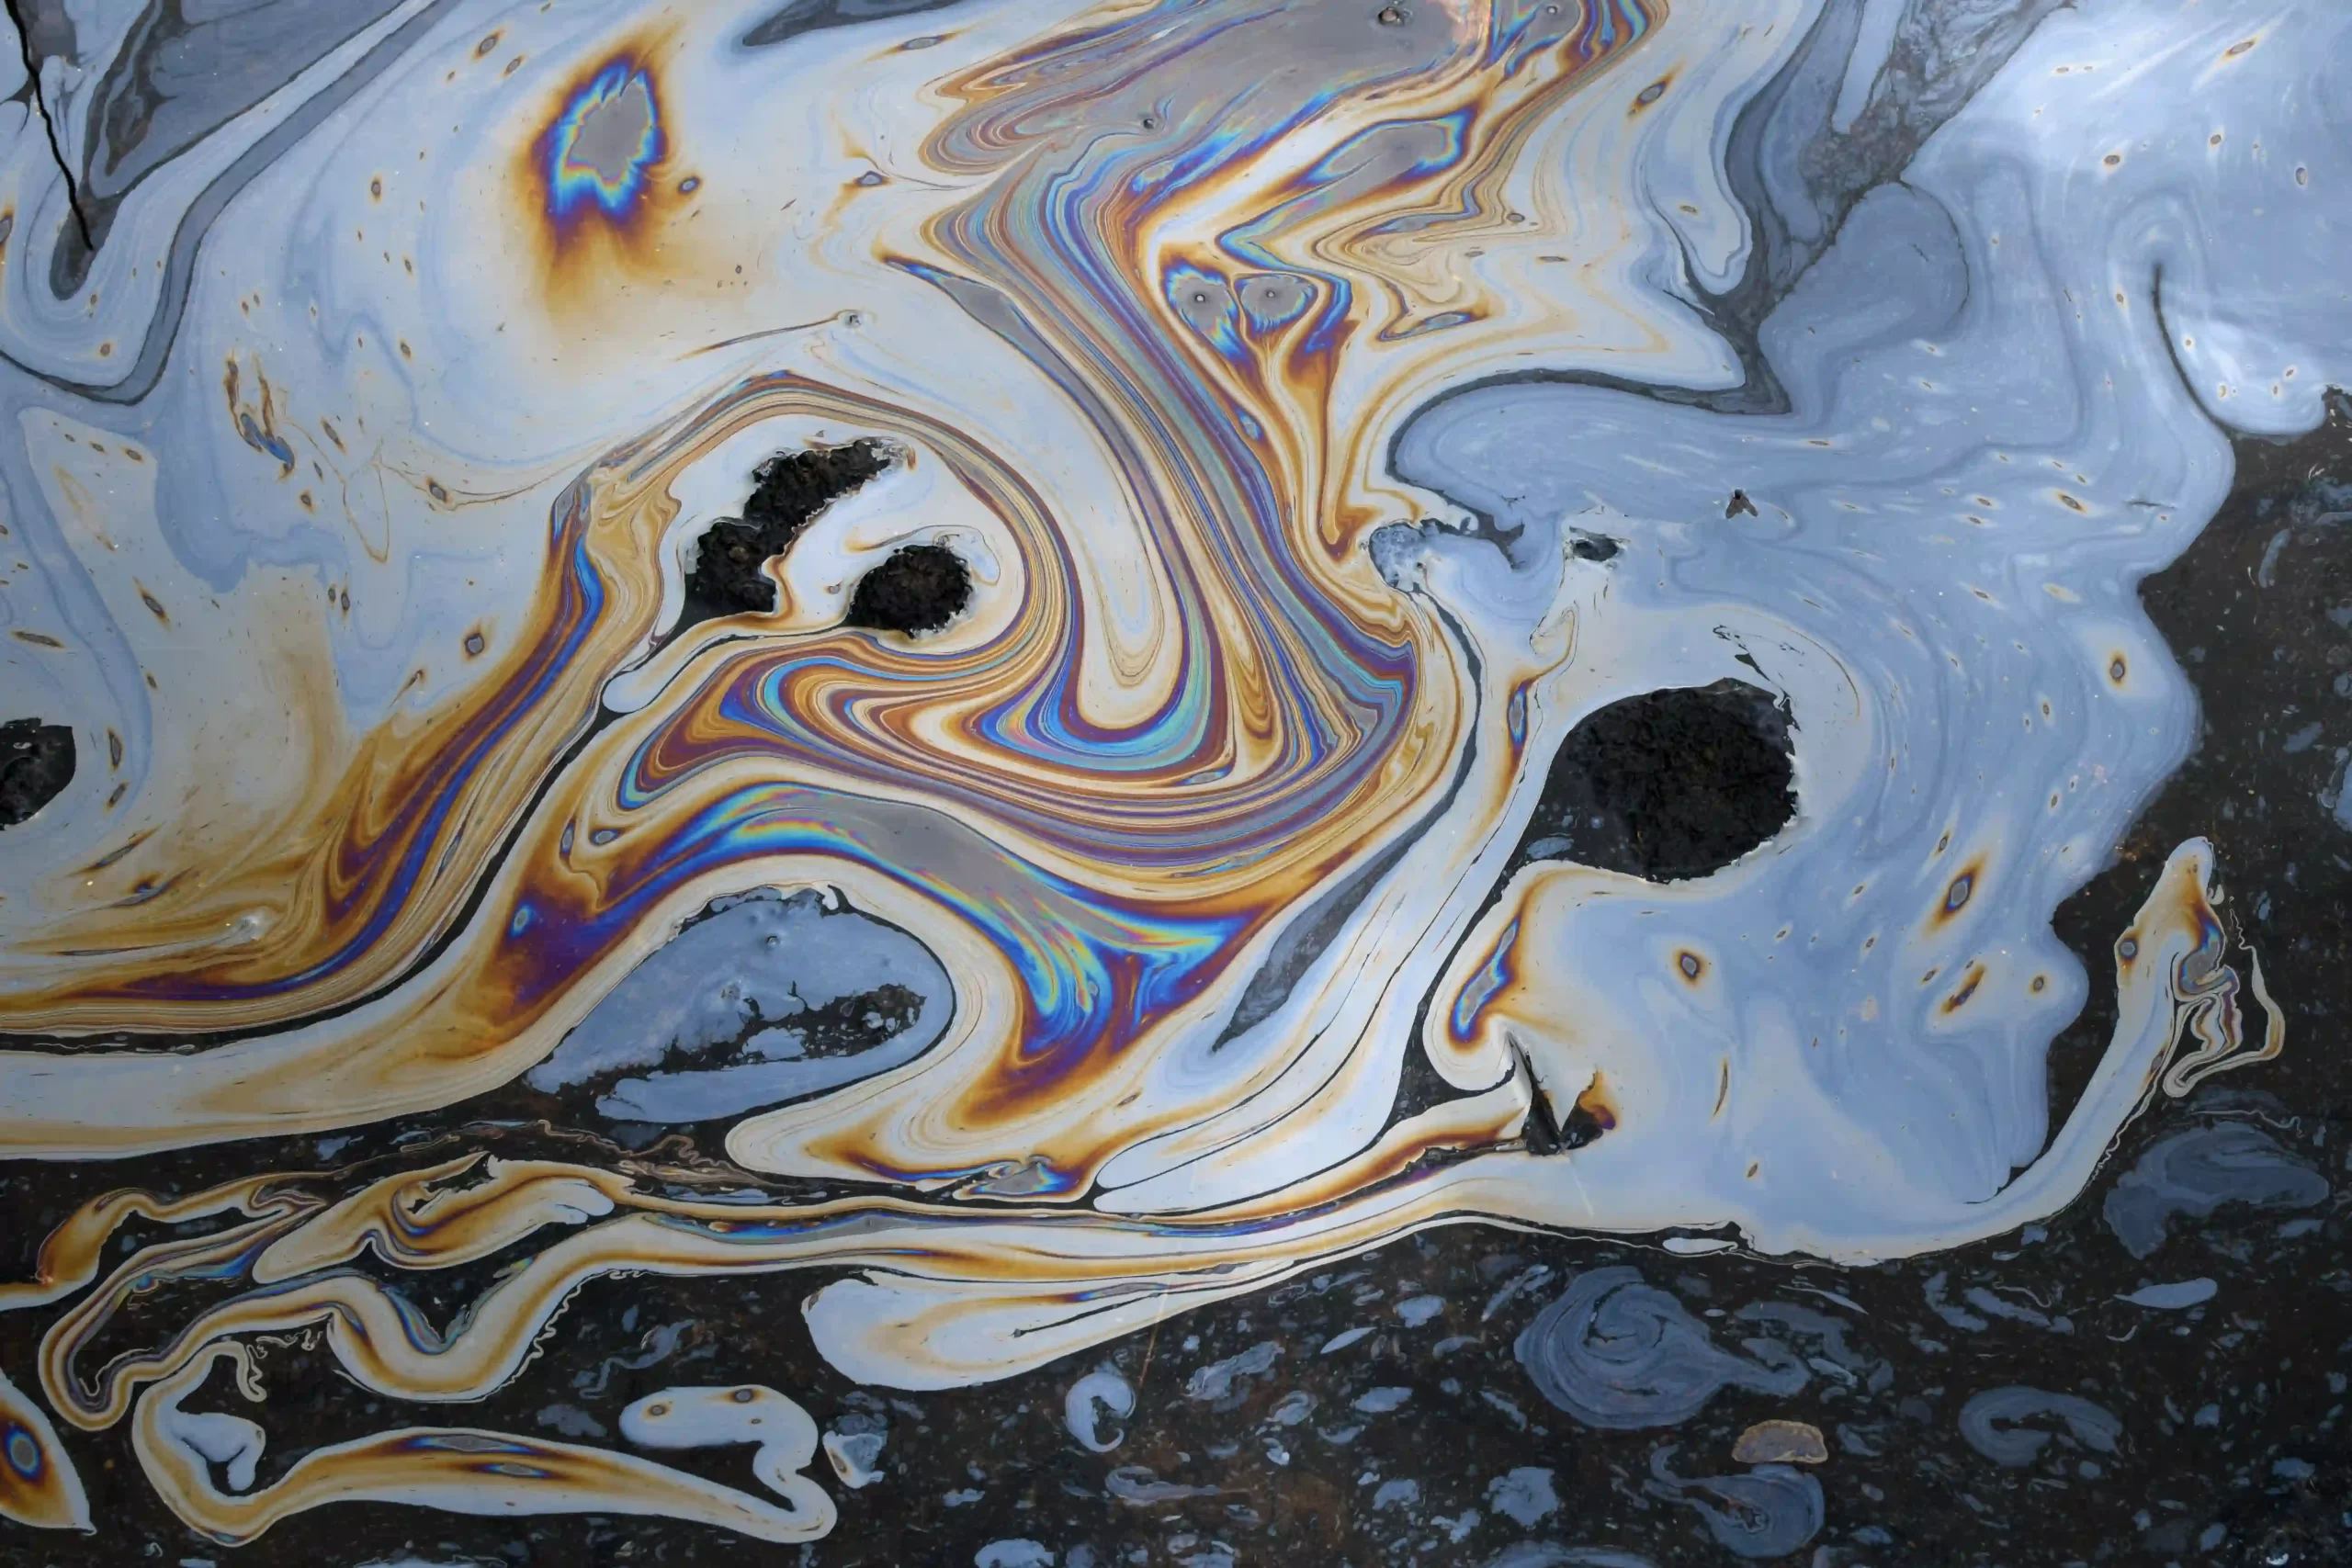 A blue, red, and orange oil slick on the surface of water, indicating chemical pollution.